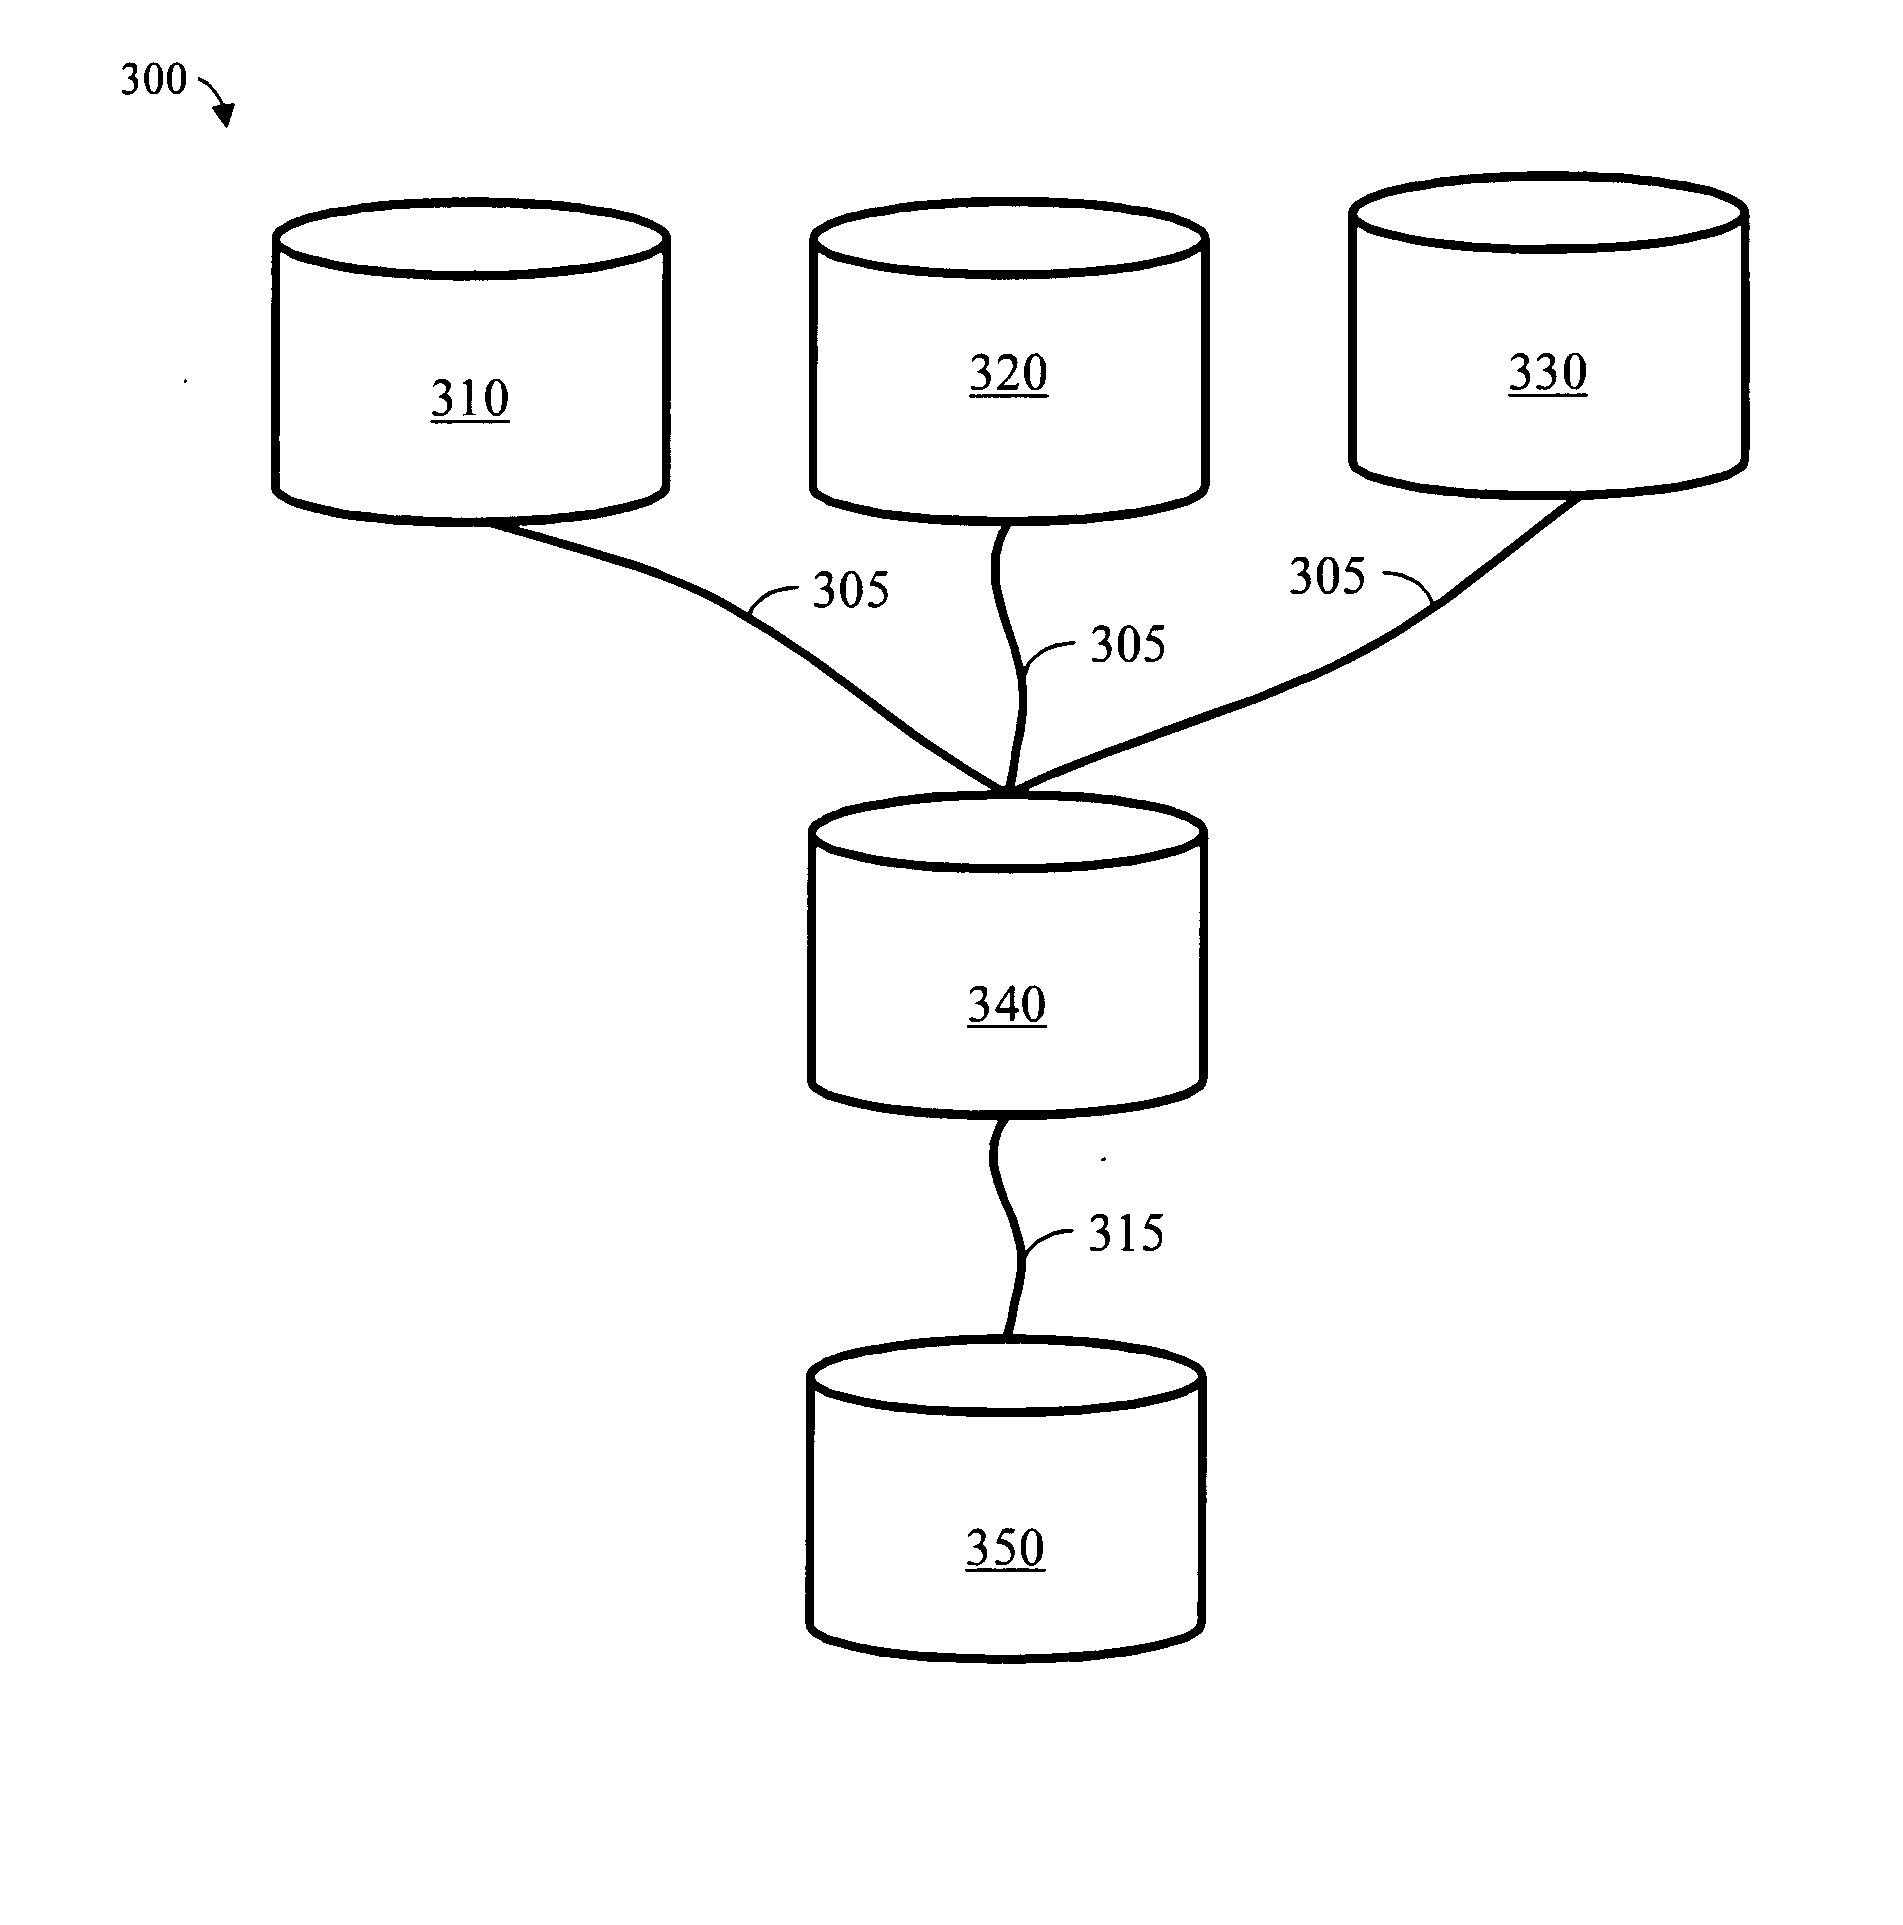 Apparatus and method for collateral recovery